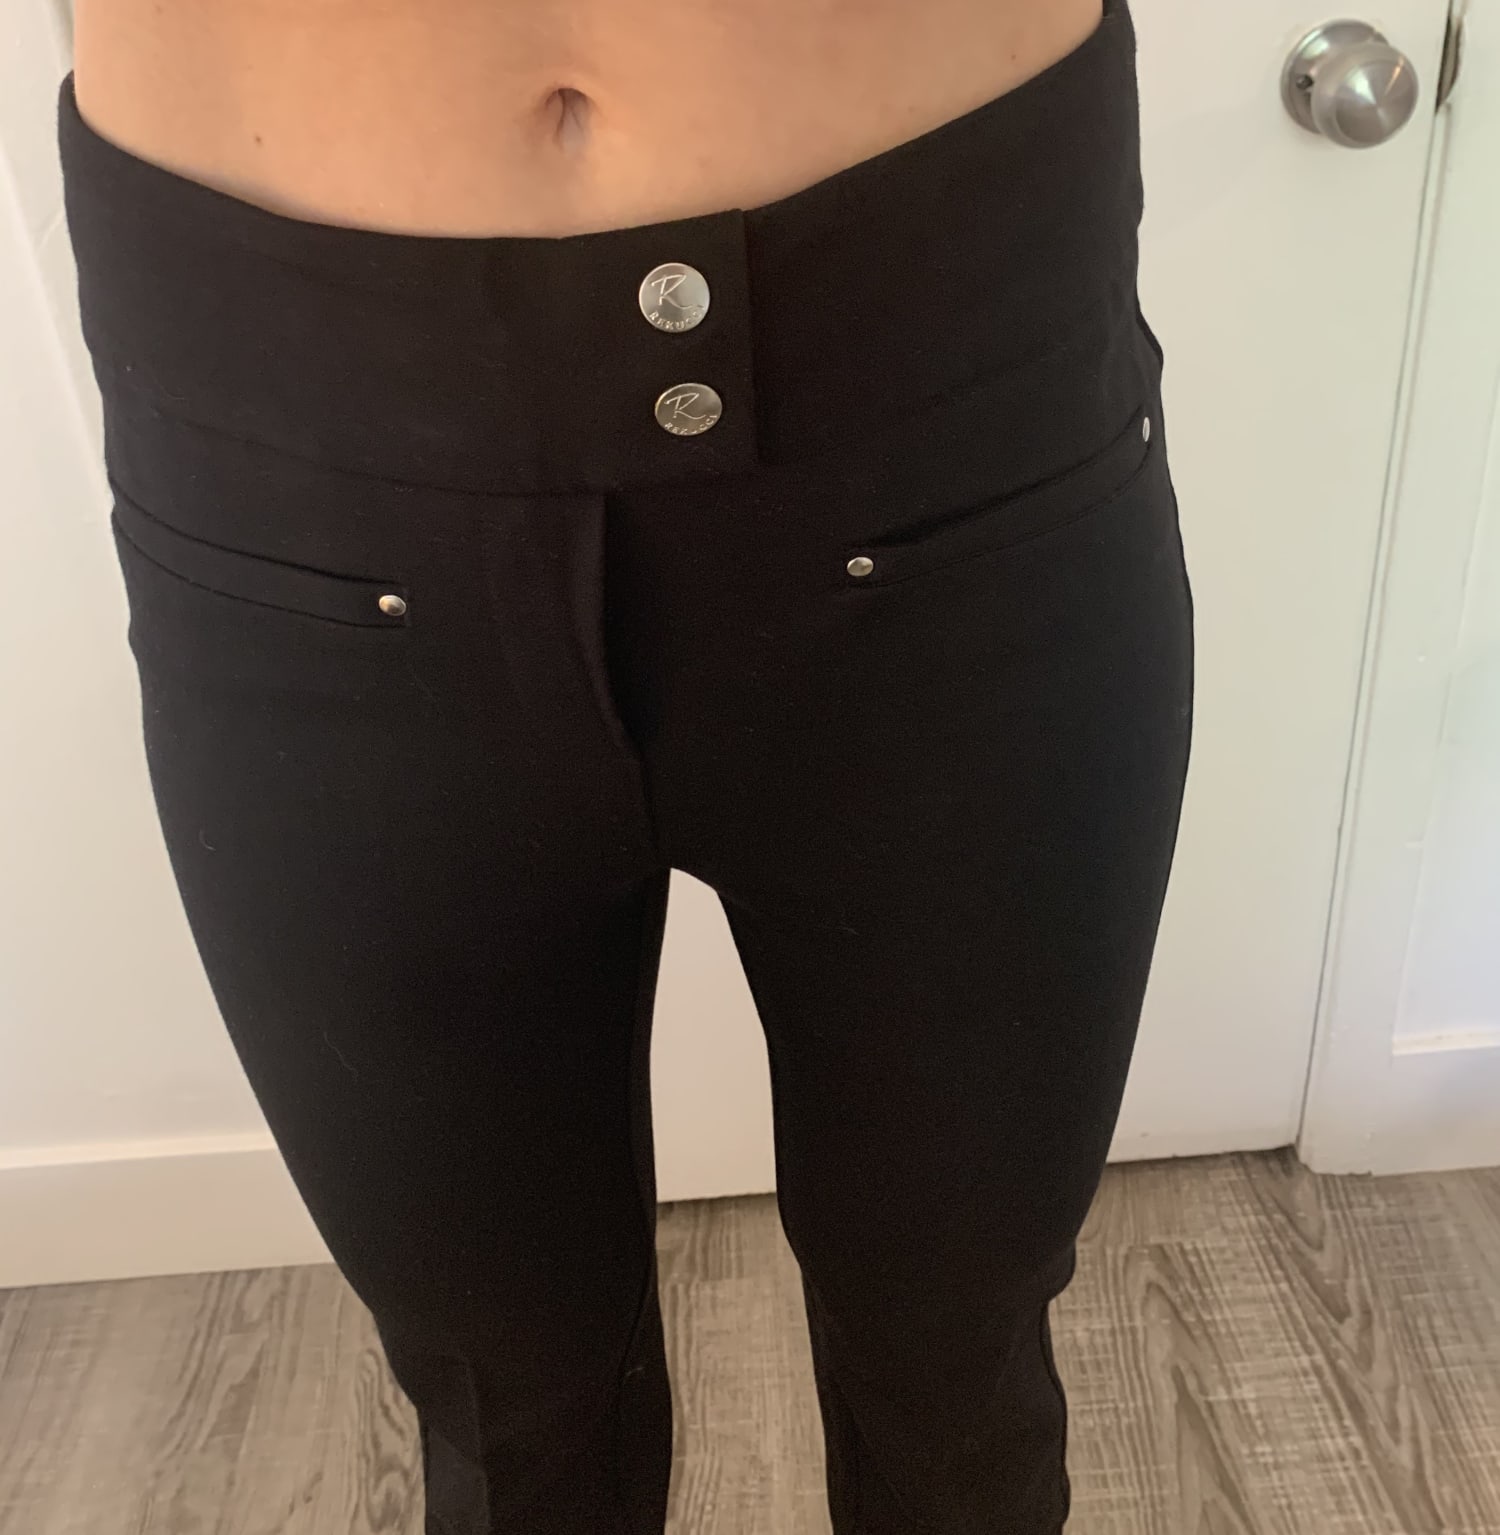 Slimming pants for weight loss  Techno FAQ